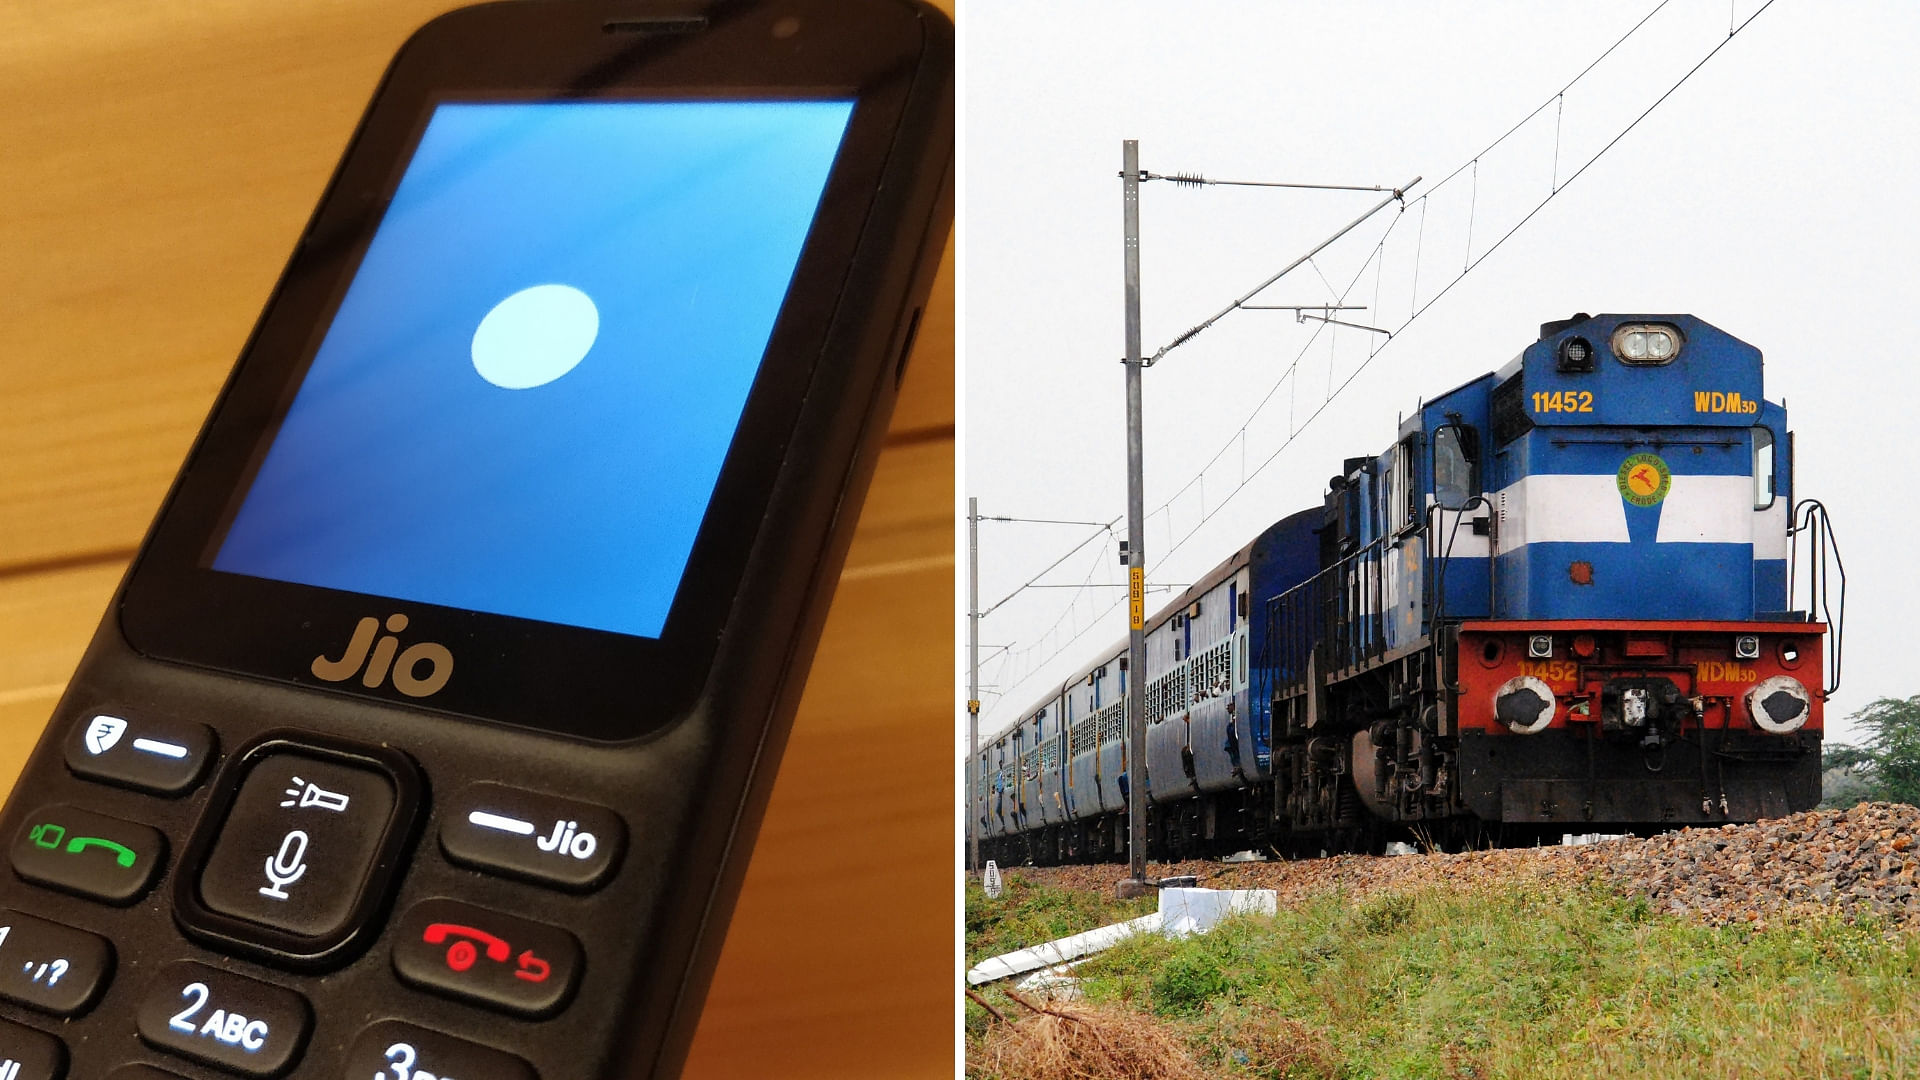 Get ticket reservations for trains via JioPhone on this app.&nbsp;